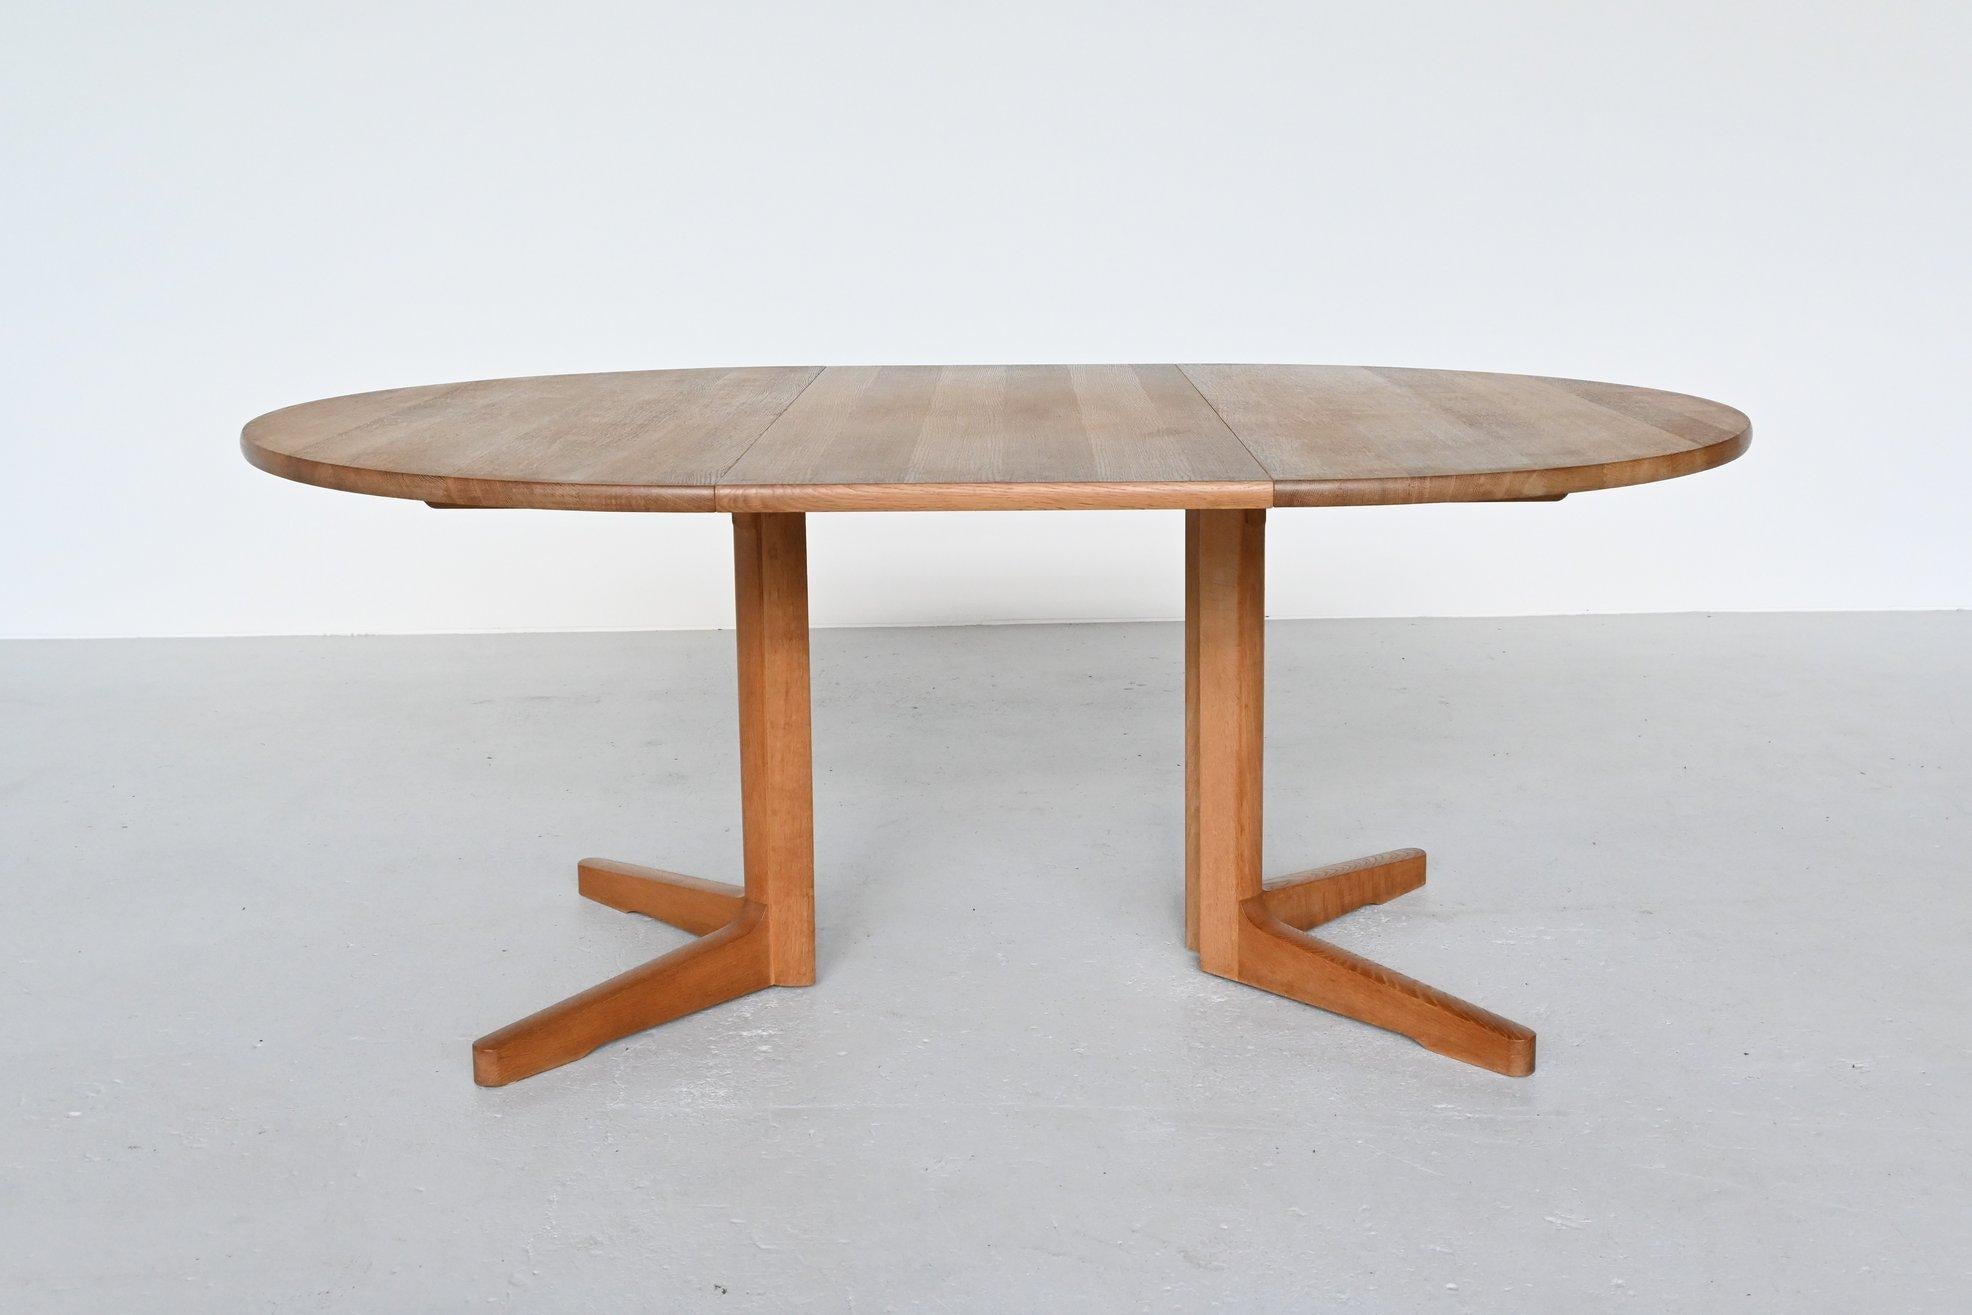 Very nice extendable dining table manufactured by CJ Rosengaarden, Denmark, 1981. The top and legs are made of high quality solid oak wood with a nice warm grain. The table can be extended from 120 cm round to 170 cm oval and can use up to 6 chairs